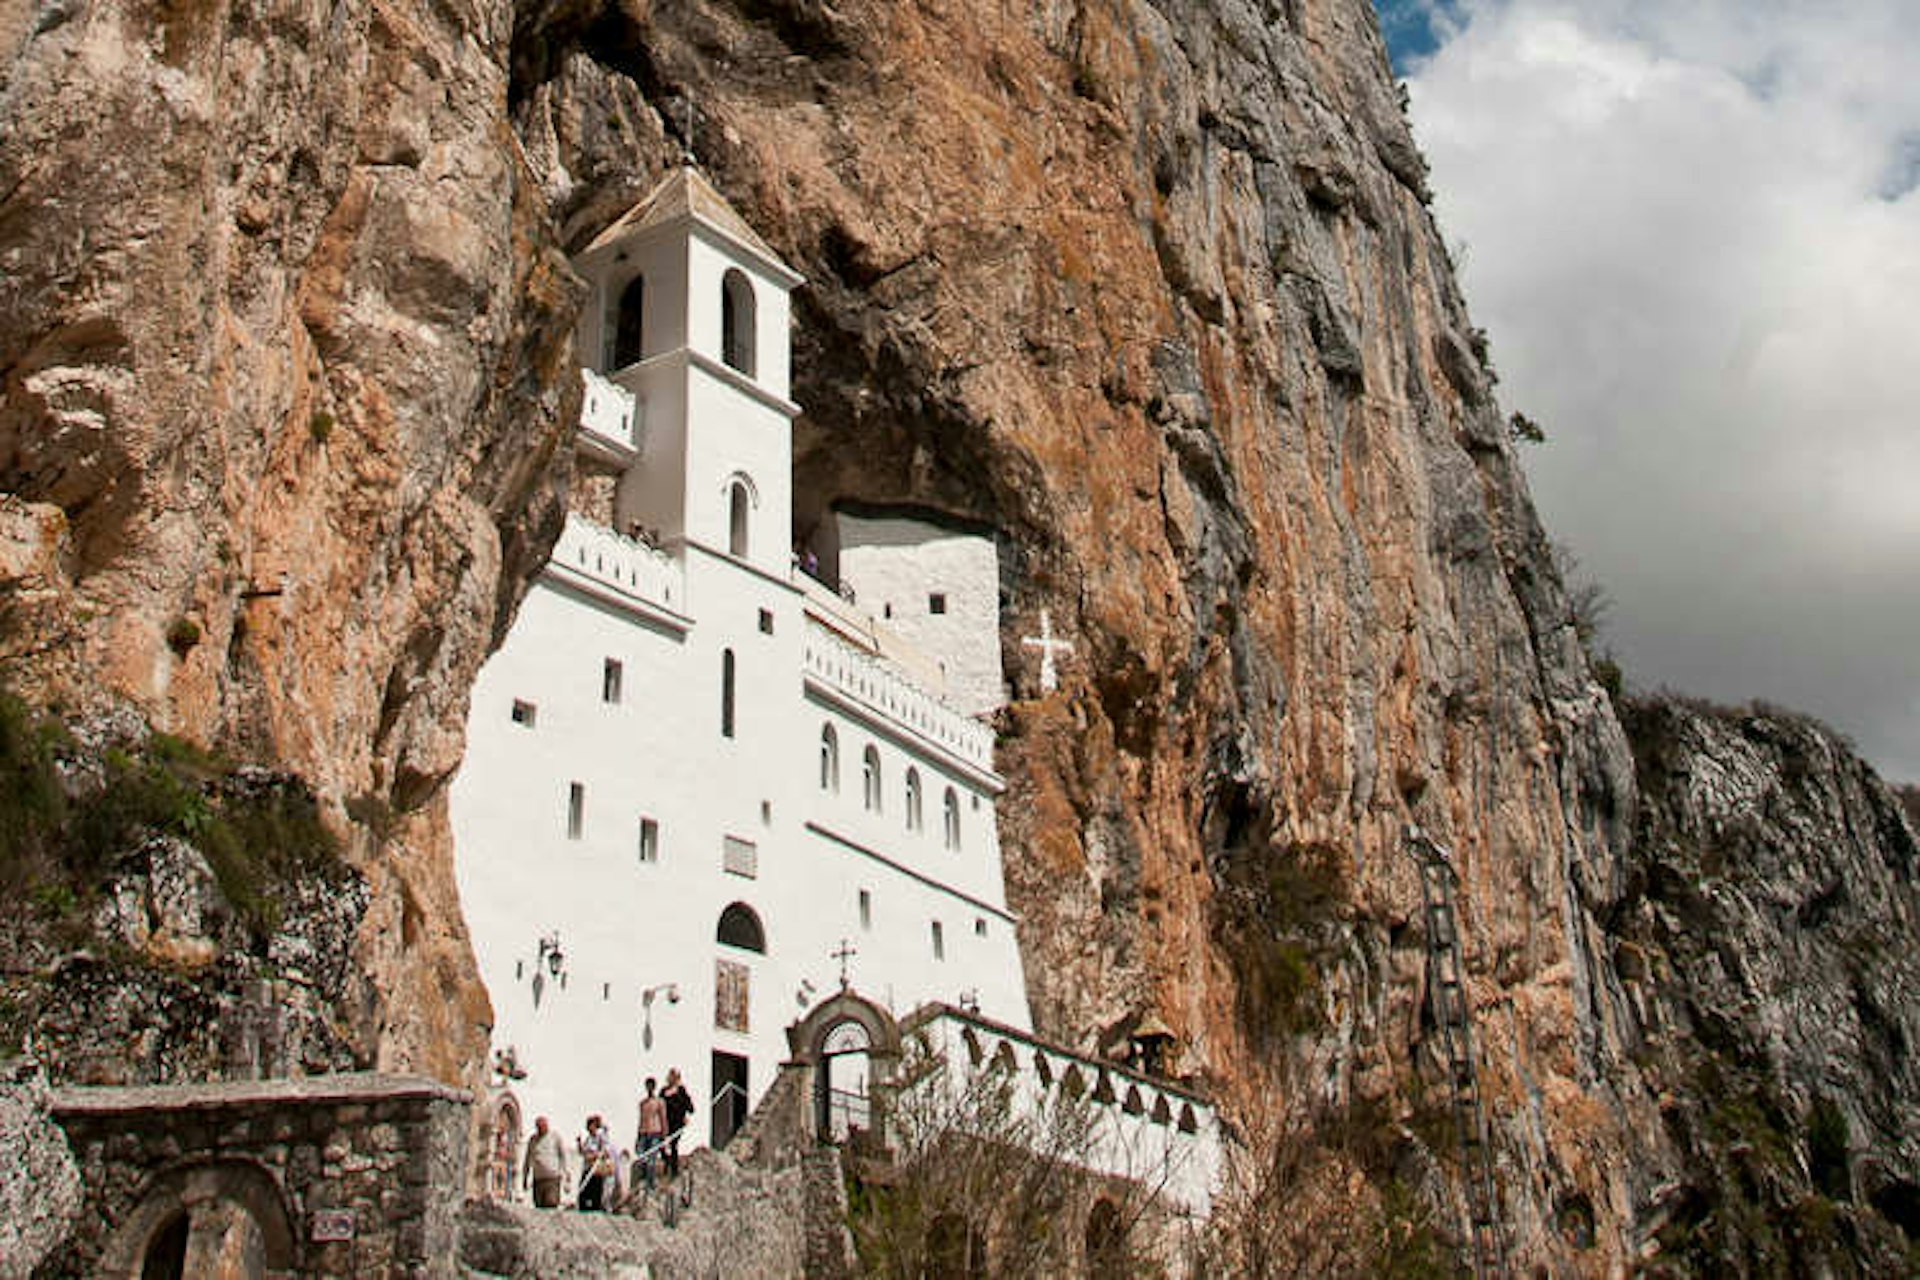 The Ostrog Monastery, built into a cave. Image by Luigi Torreggiani / CC BY 2.0